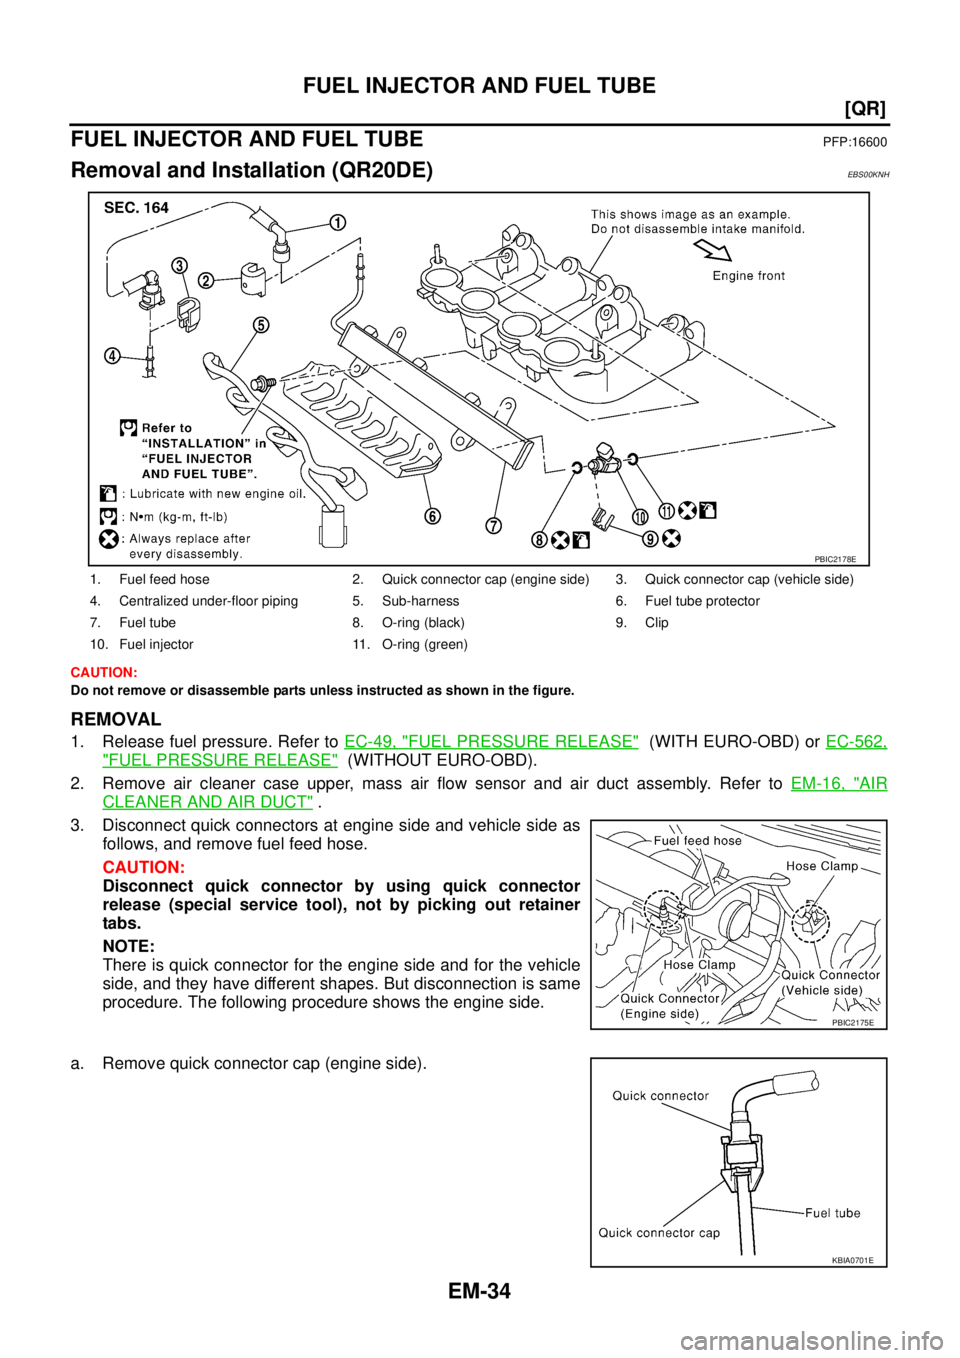 NISSAN X-TRAIL 2005  Service Repair Manual EM-34
[QR]
FUEL INJECTOR AND FUEL TUBE
 
FUEL INJECTOR AND FUEL TUBEPFP:16600
Removal and Installation (QR20DE)EBS00KNH
CAUTION:
Do not remove or disassemble parts unless instructed as shown in the fi